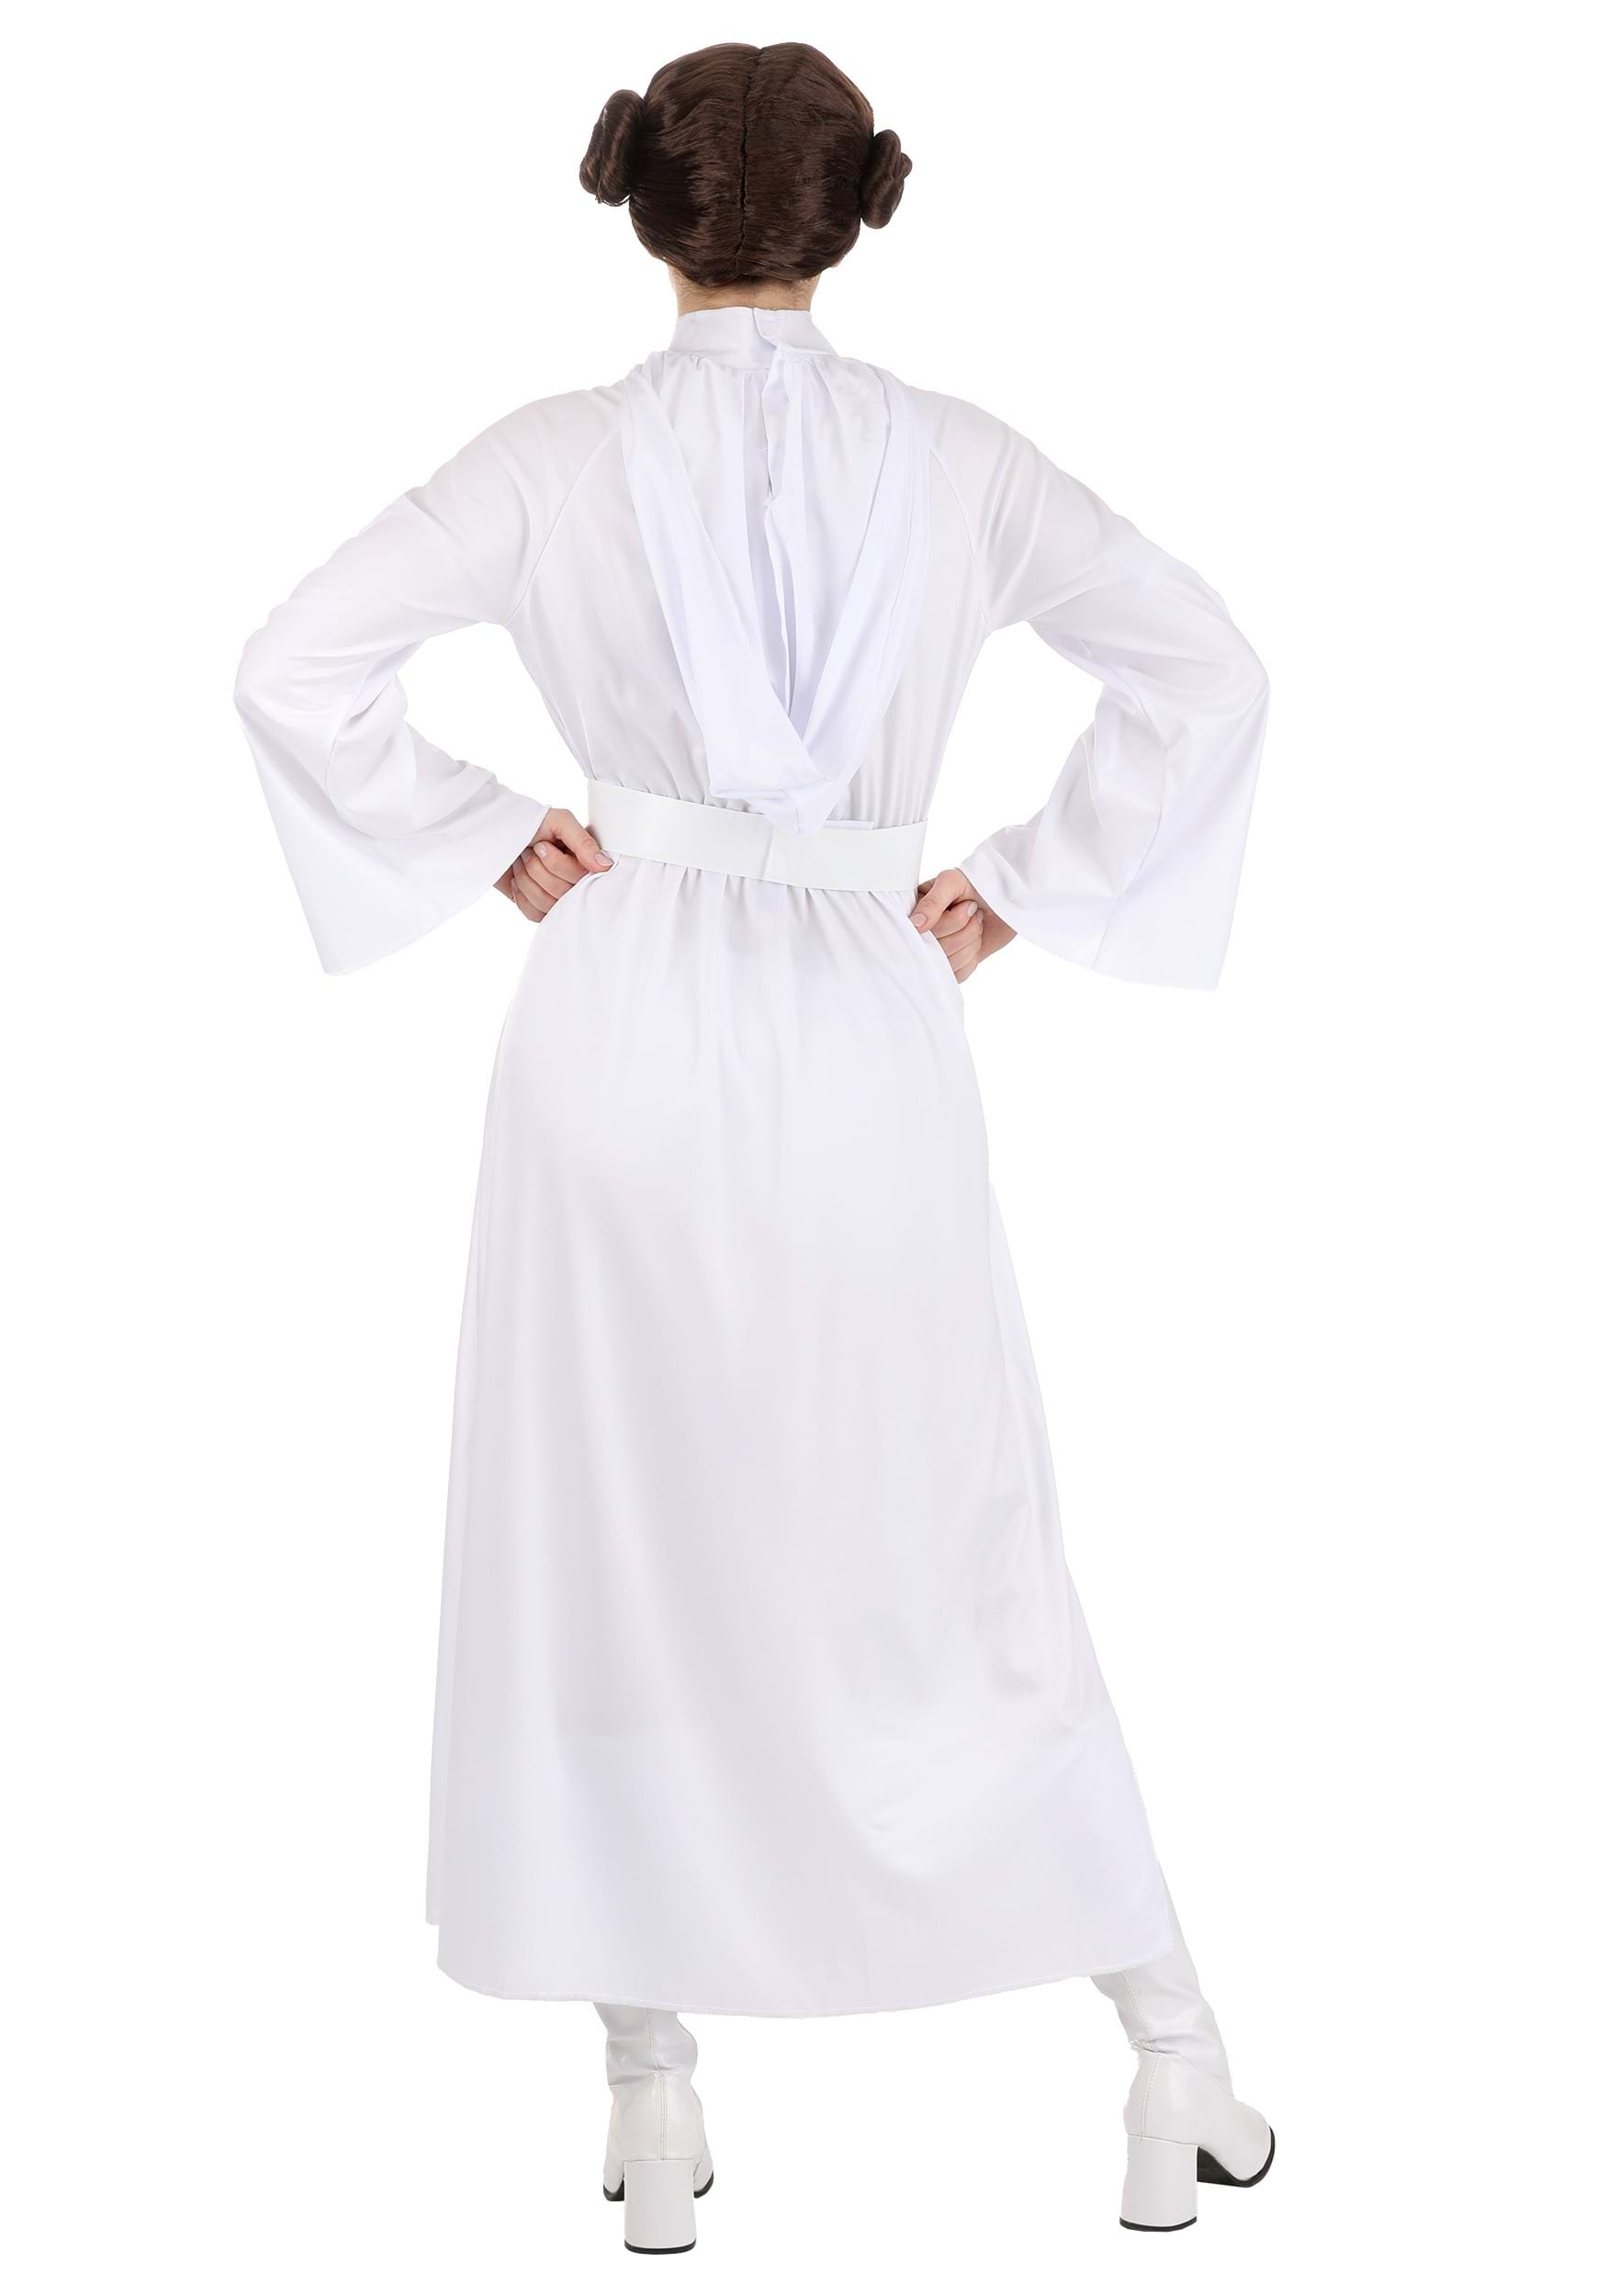 Princess Leia Hooded Costume For Adults